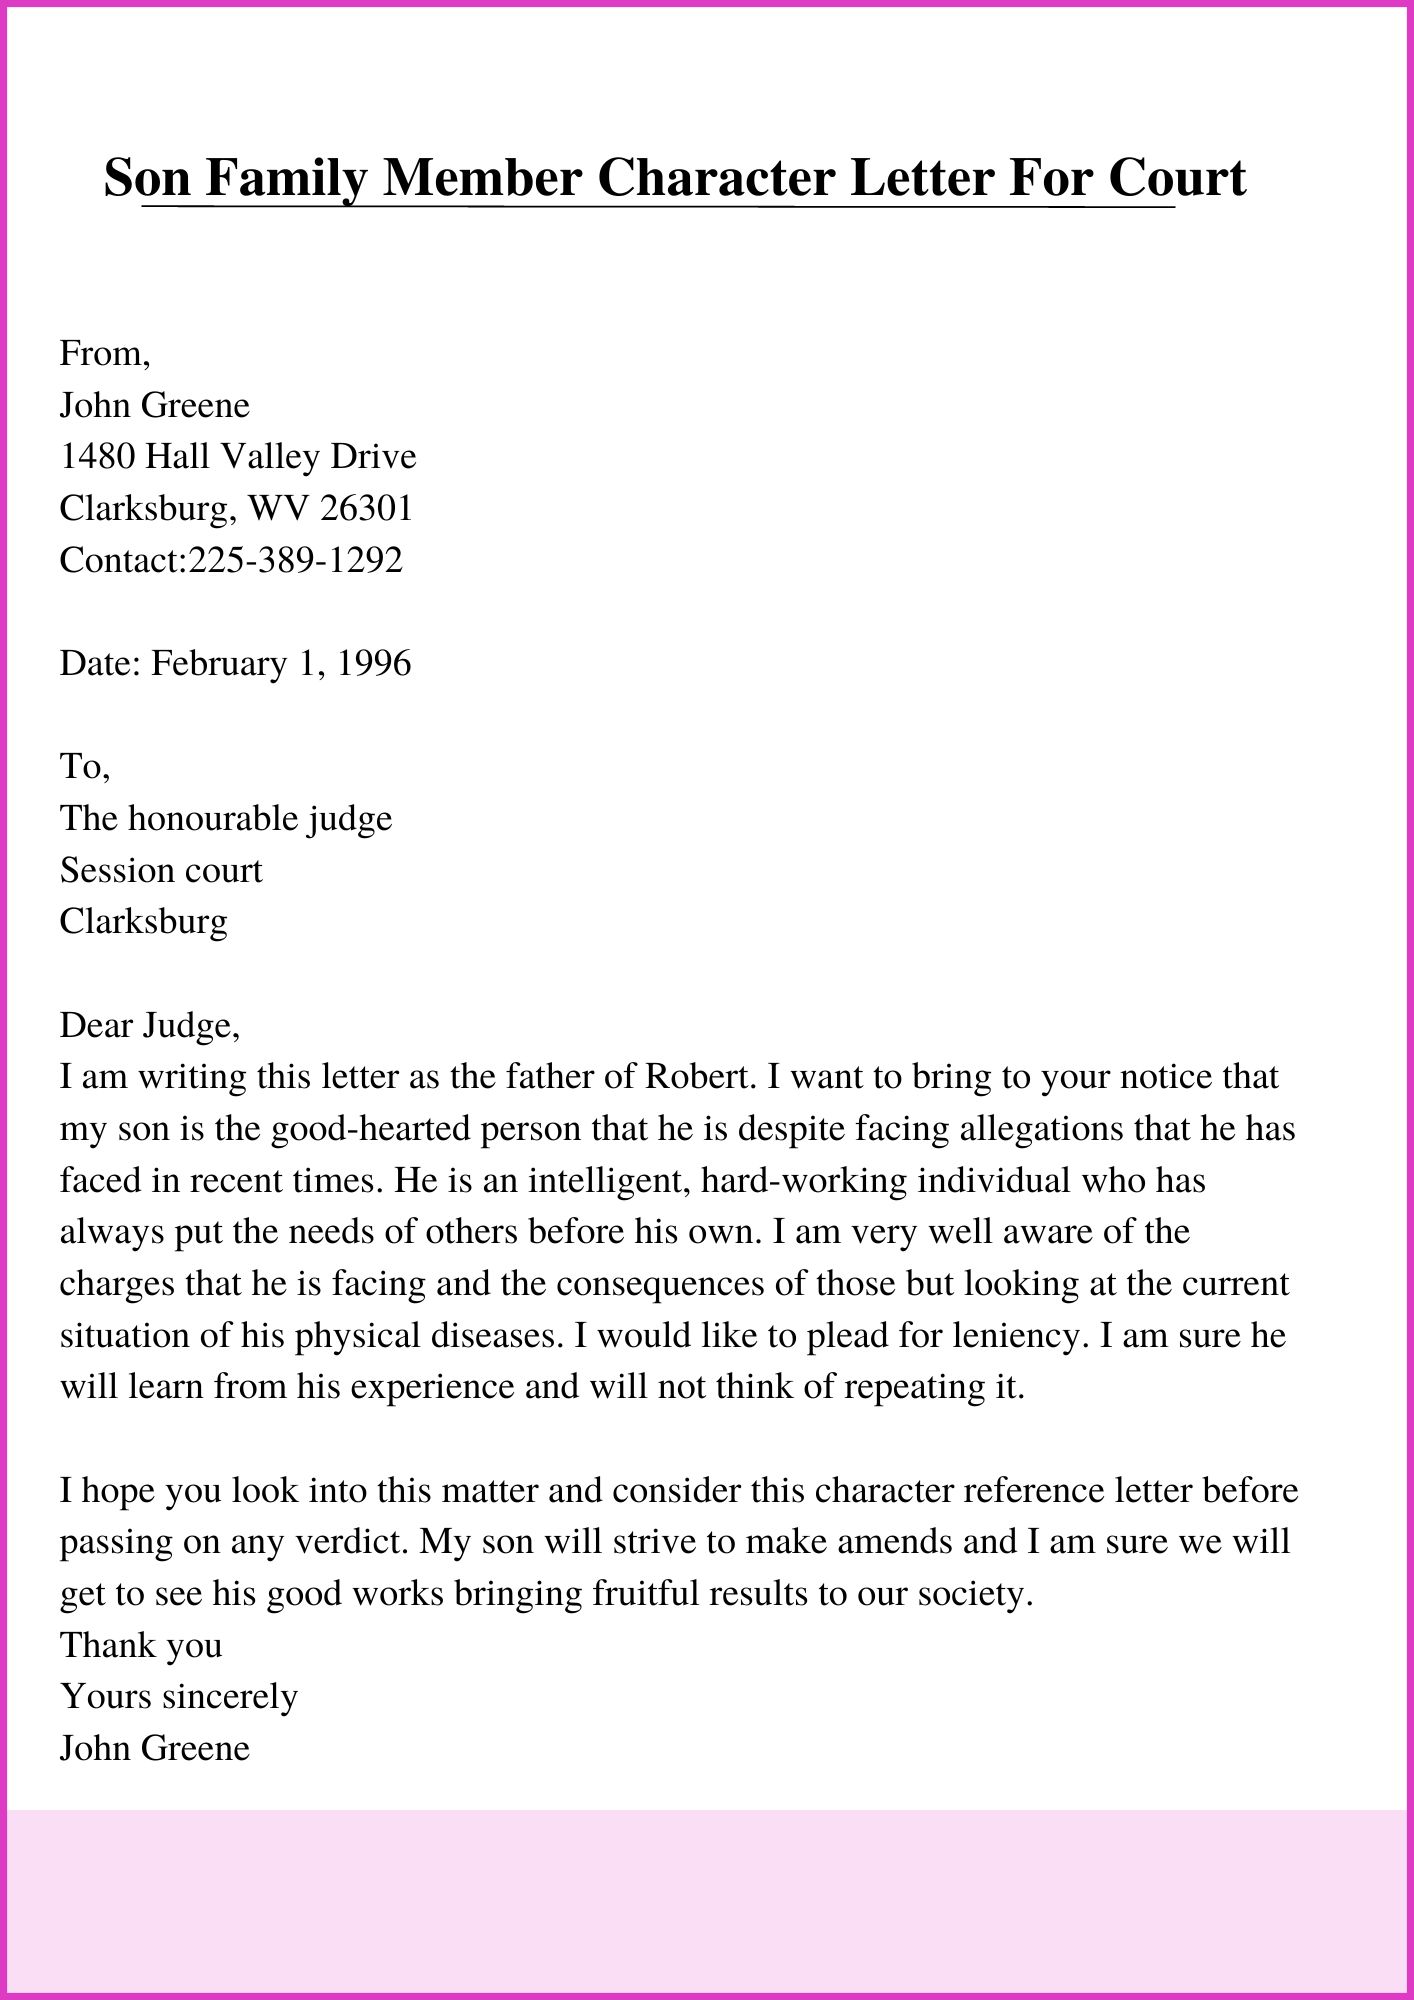 Sample Character Letter To Judge For Son  